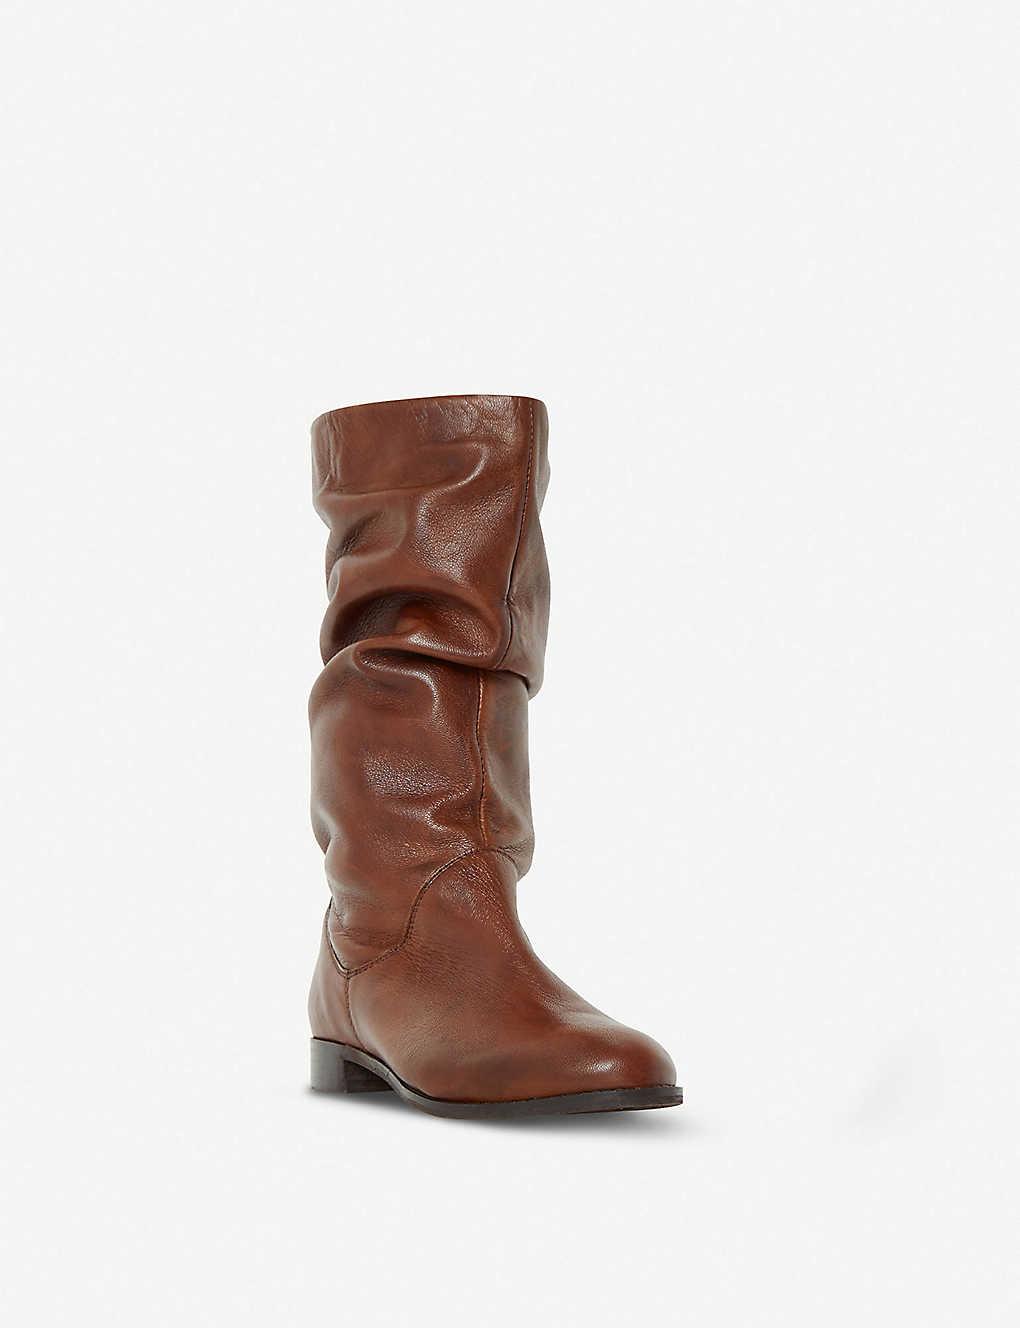 Dune Rosalind Slouchy Leather Boots in Tan-Leather (Brown) - Lyst